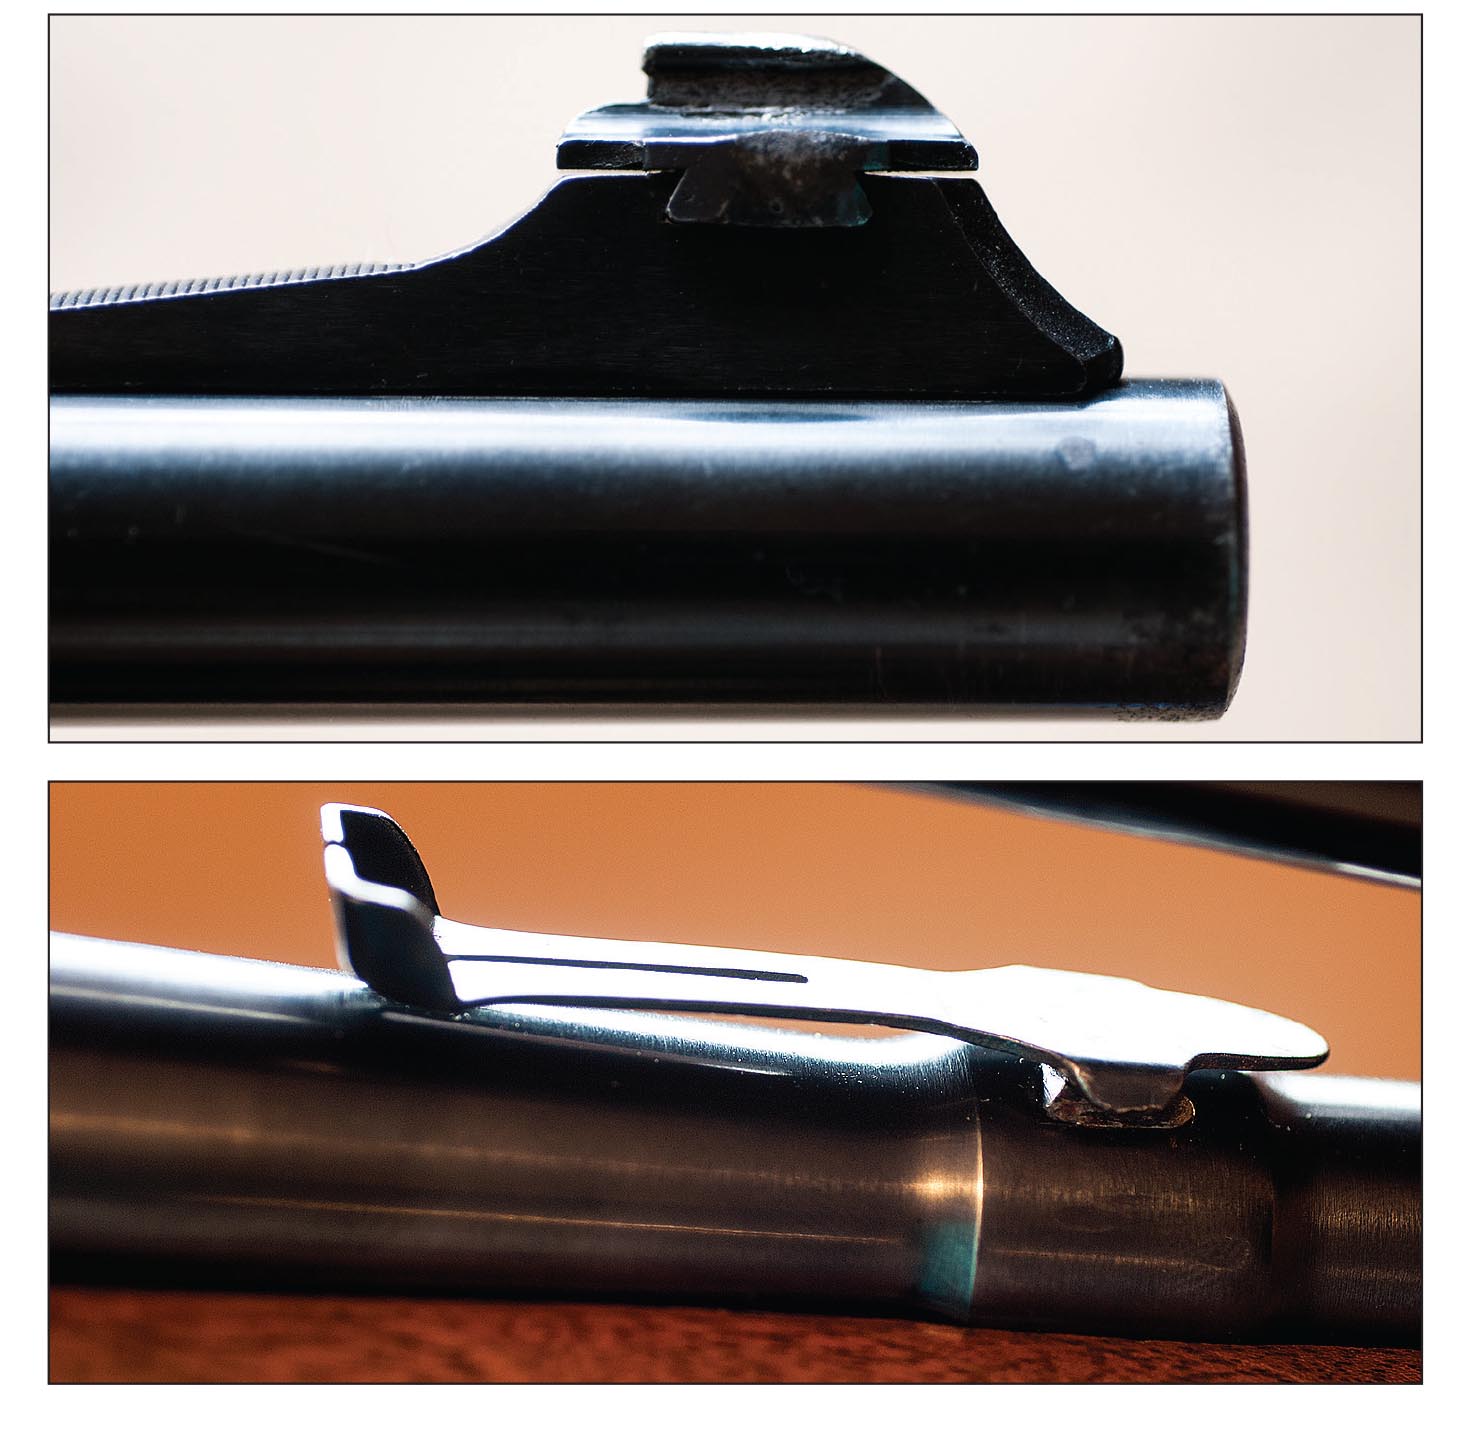 While the front sight was adjustable for windage and the rear (here missing the wedge) was adjustable for elevation, nearly all of Remington’s new rifles were drilled and tapped for scope use.